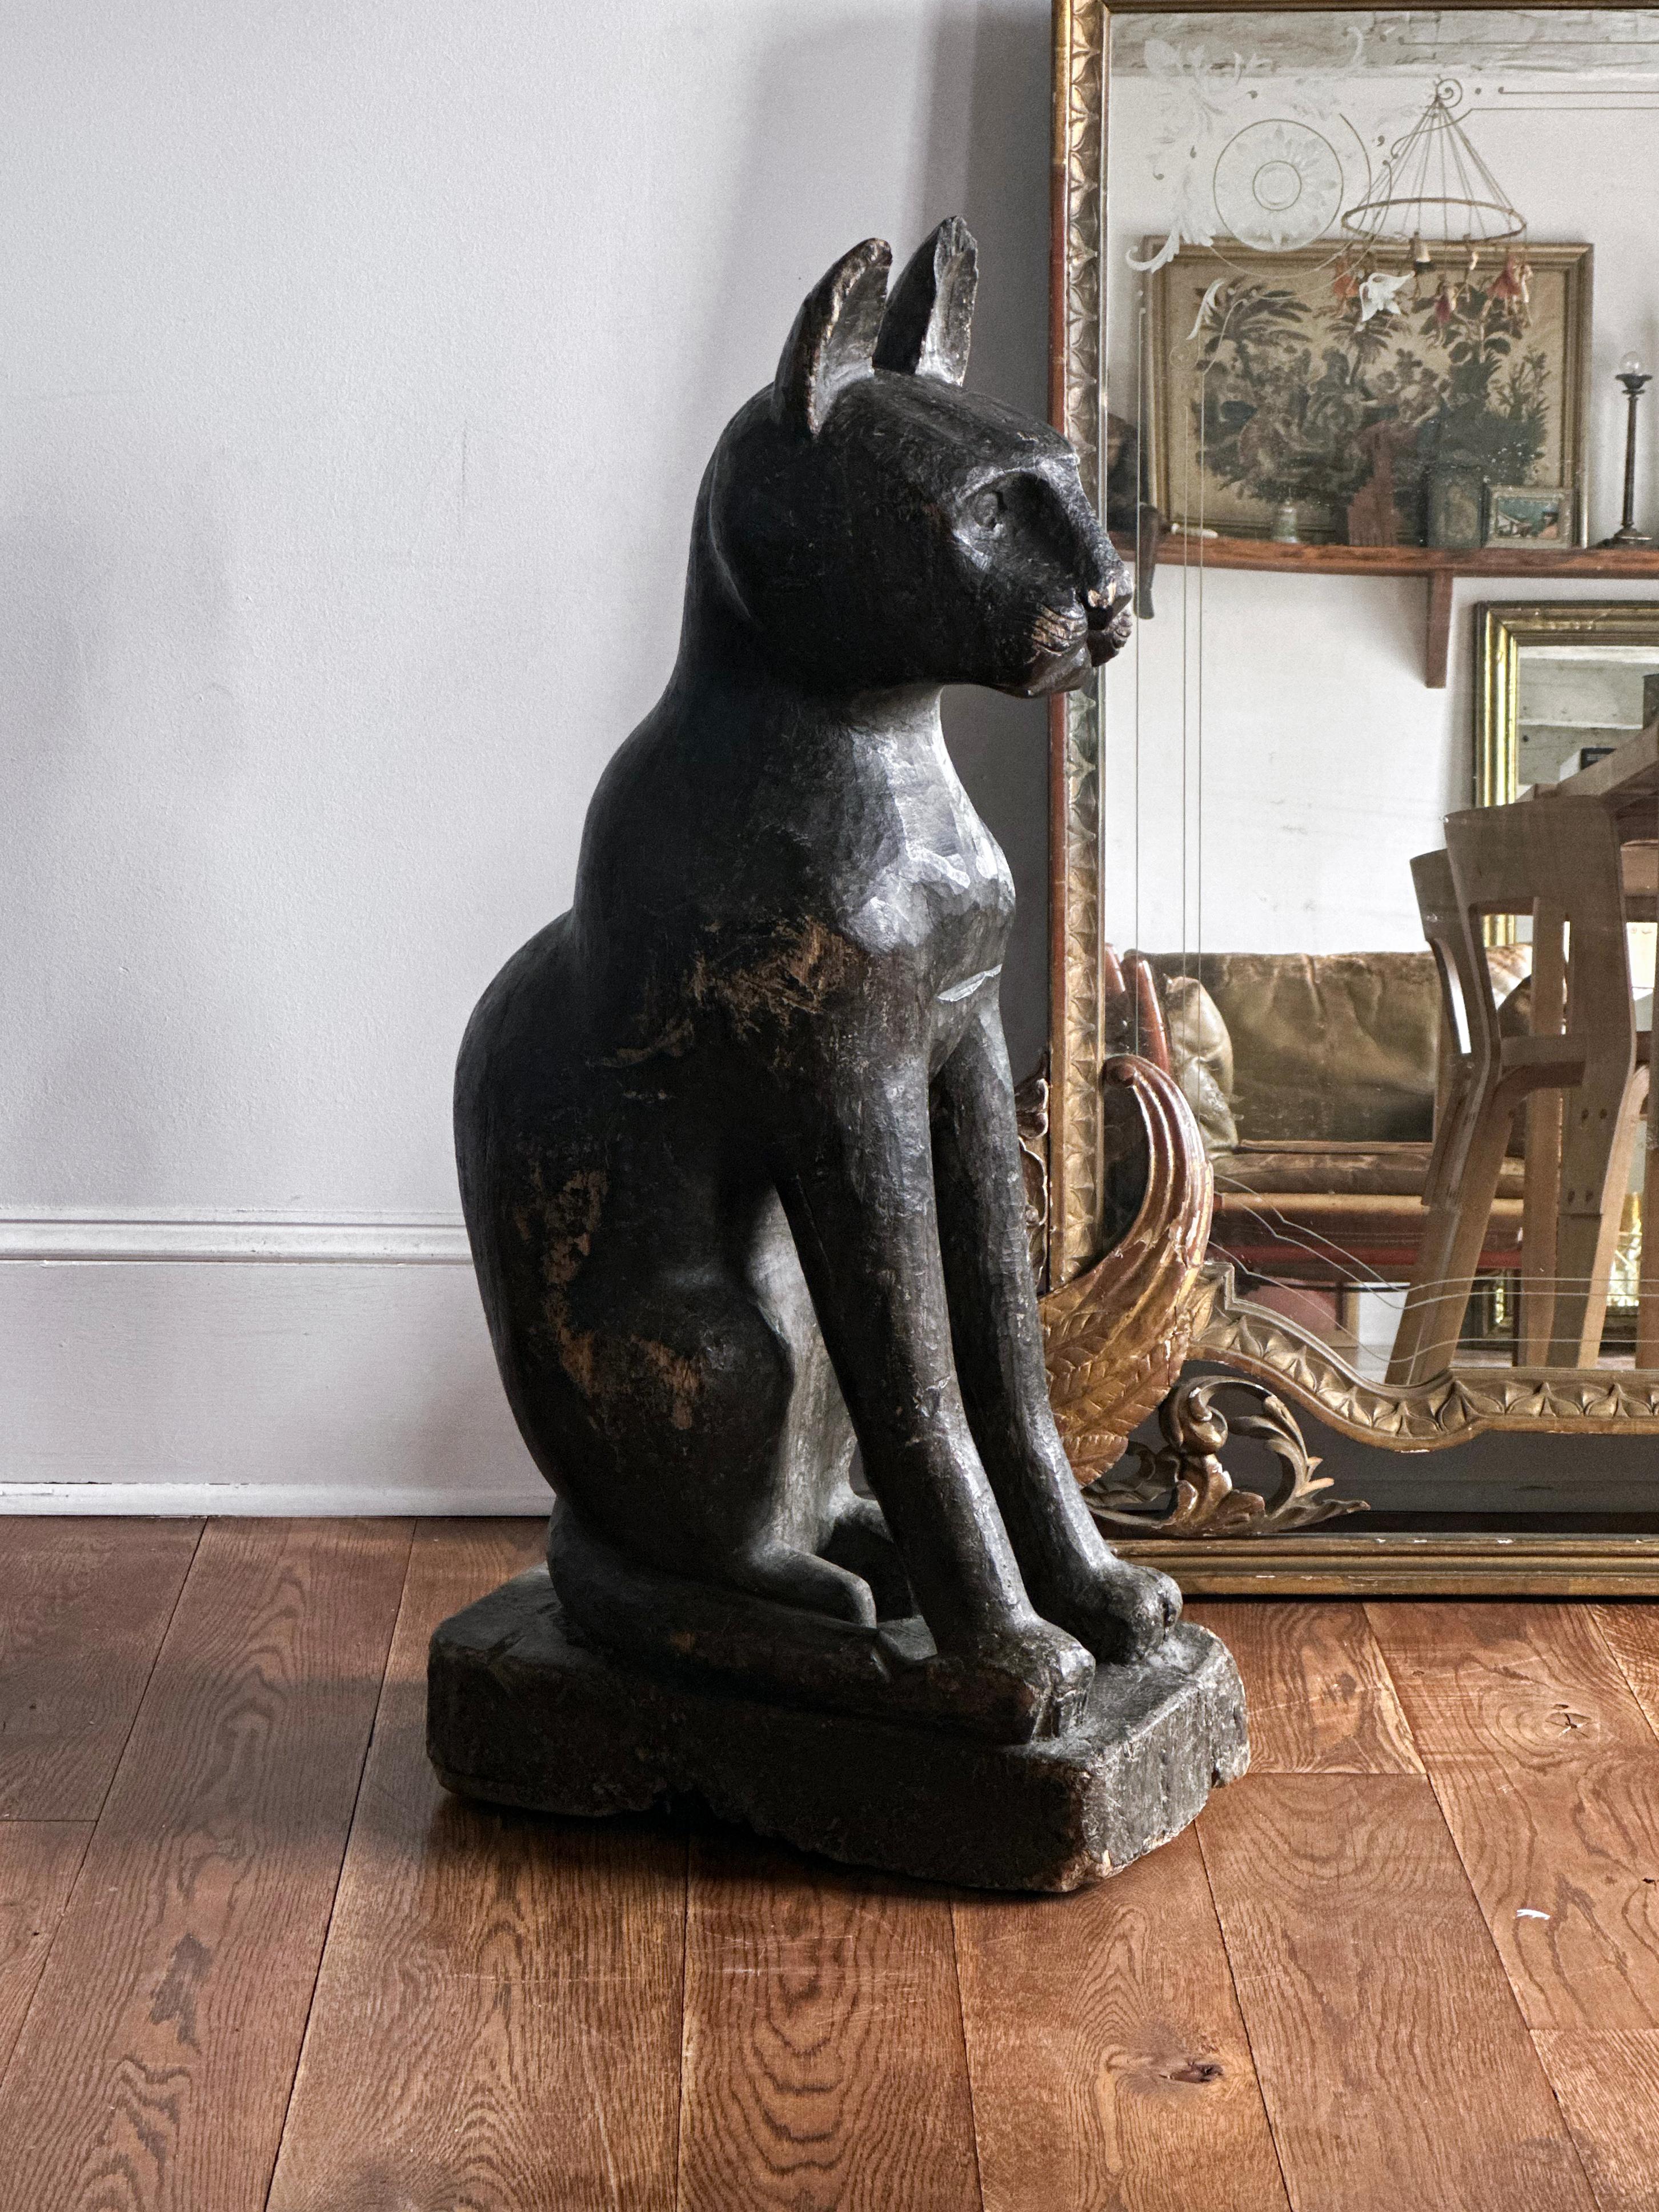 Egyptian revival carved wood Cat, Bastet C.1900

Impressive scale. Beautiful Patina. Great style. 